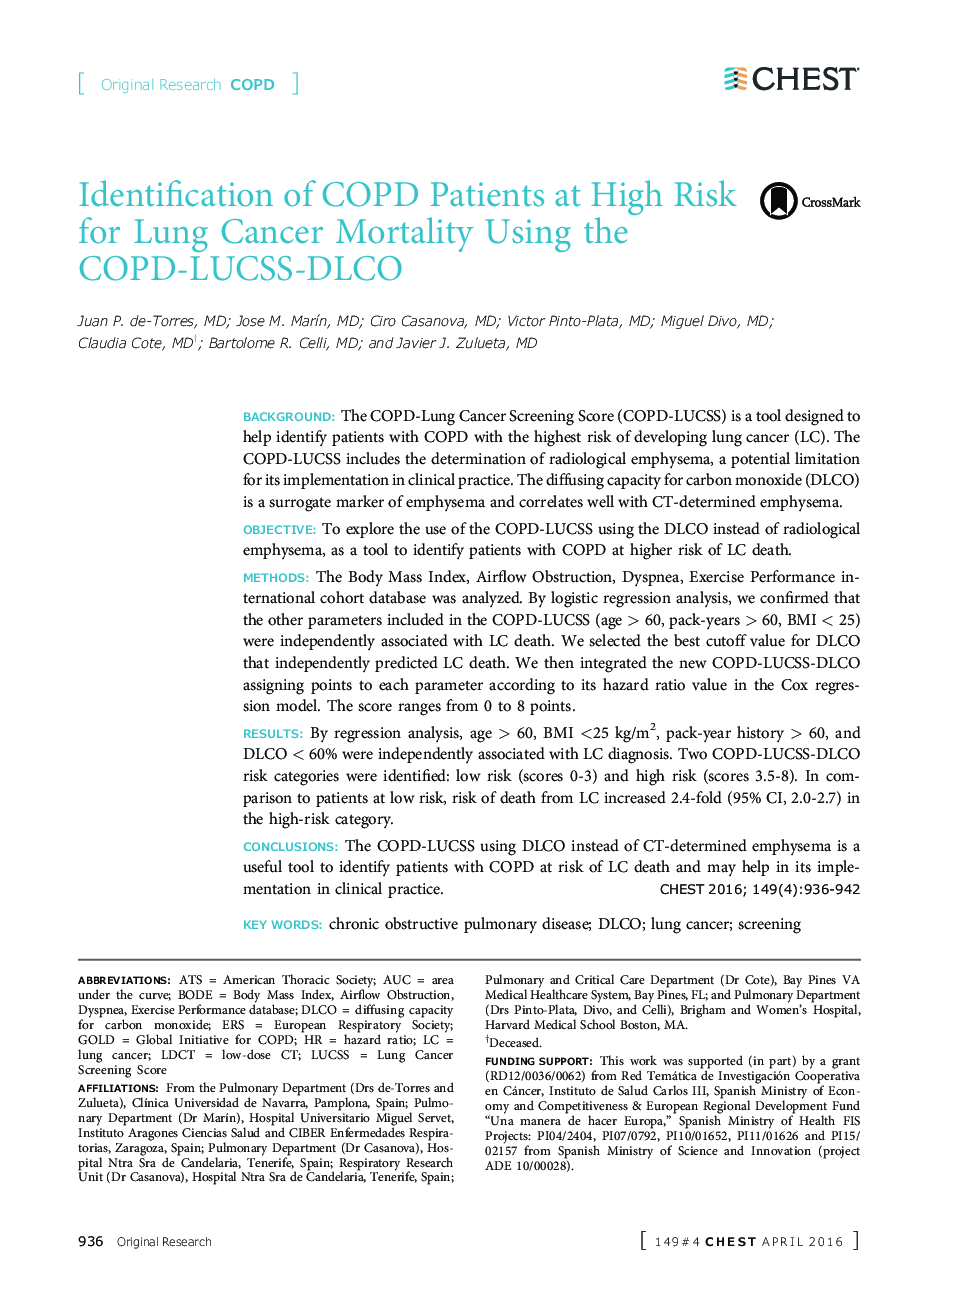 Identification of COPD Patients at High Risk for Lung Cancer Mortality Using the COPD-LUCSS-DLCO